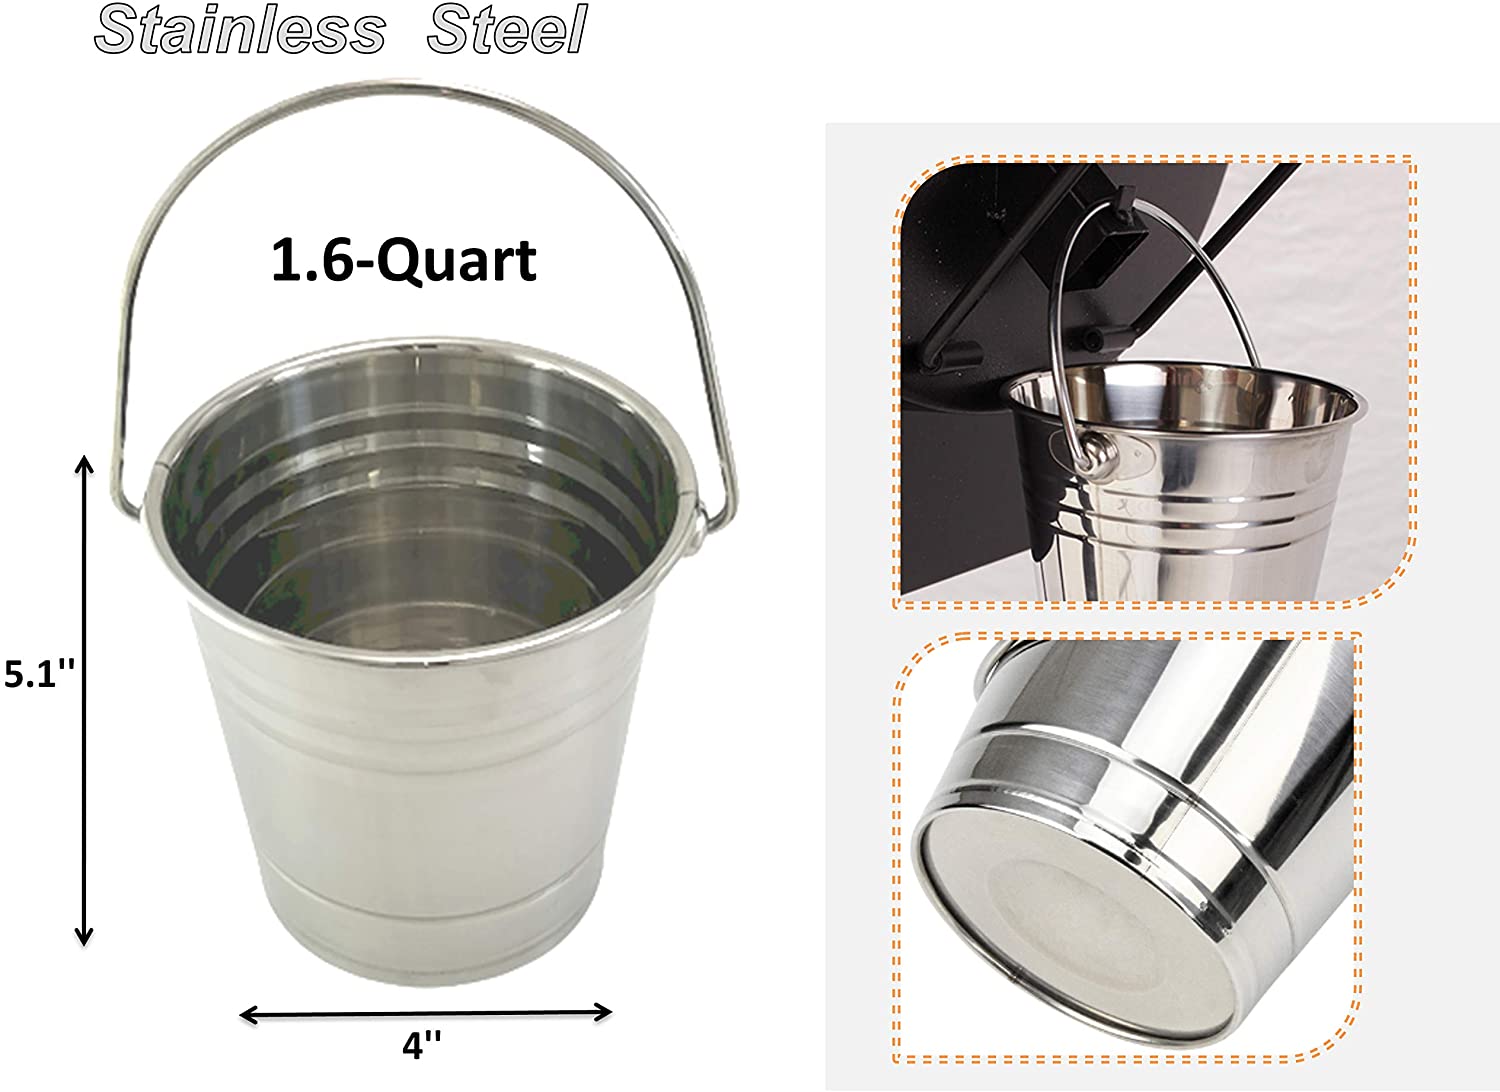 BIG PART Stainless Steel Grease Bucket with 12-Pack Drip Bucket Insert Replacement for Green Mountain Grills